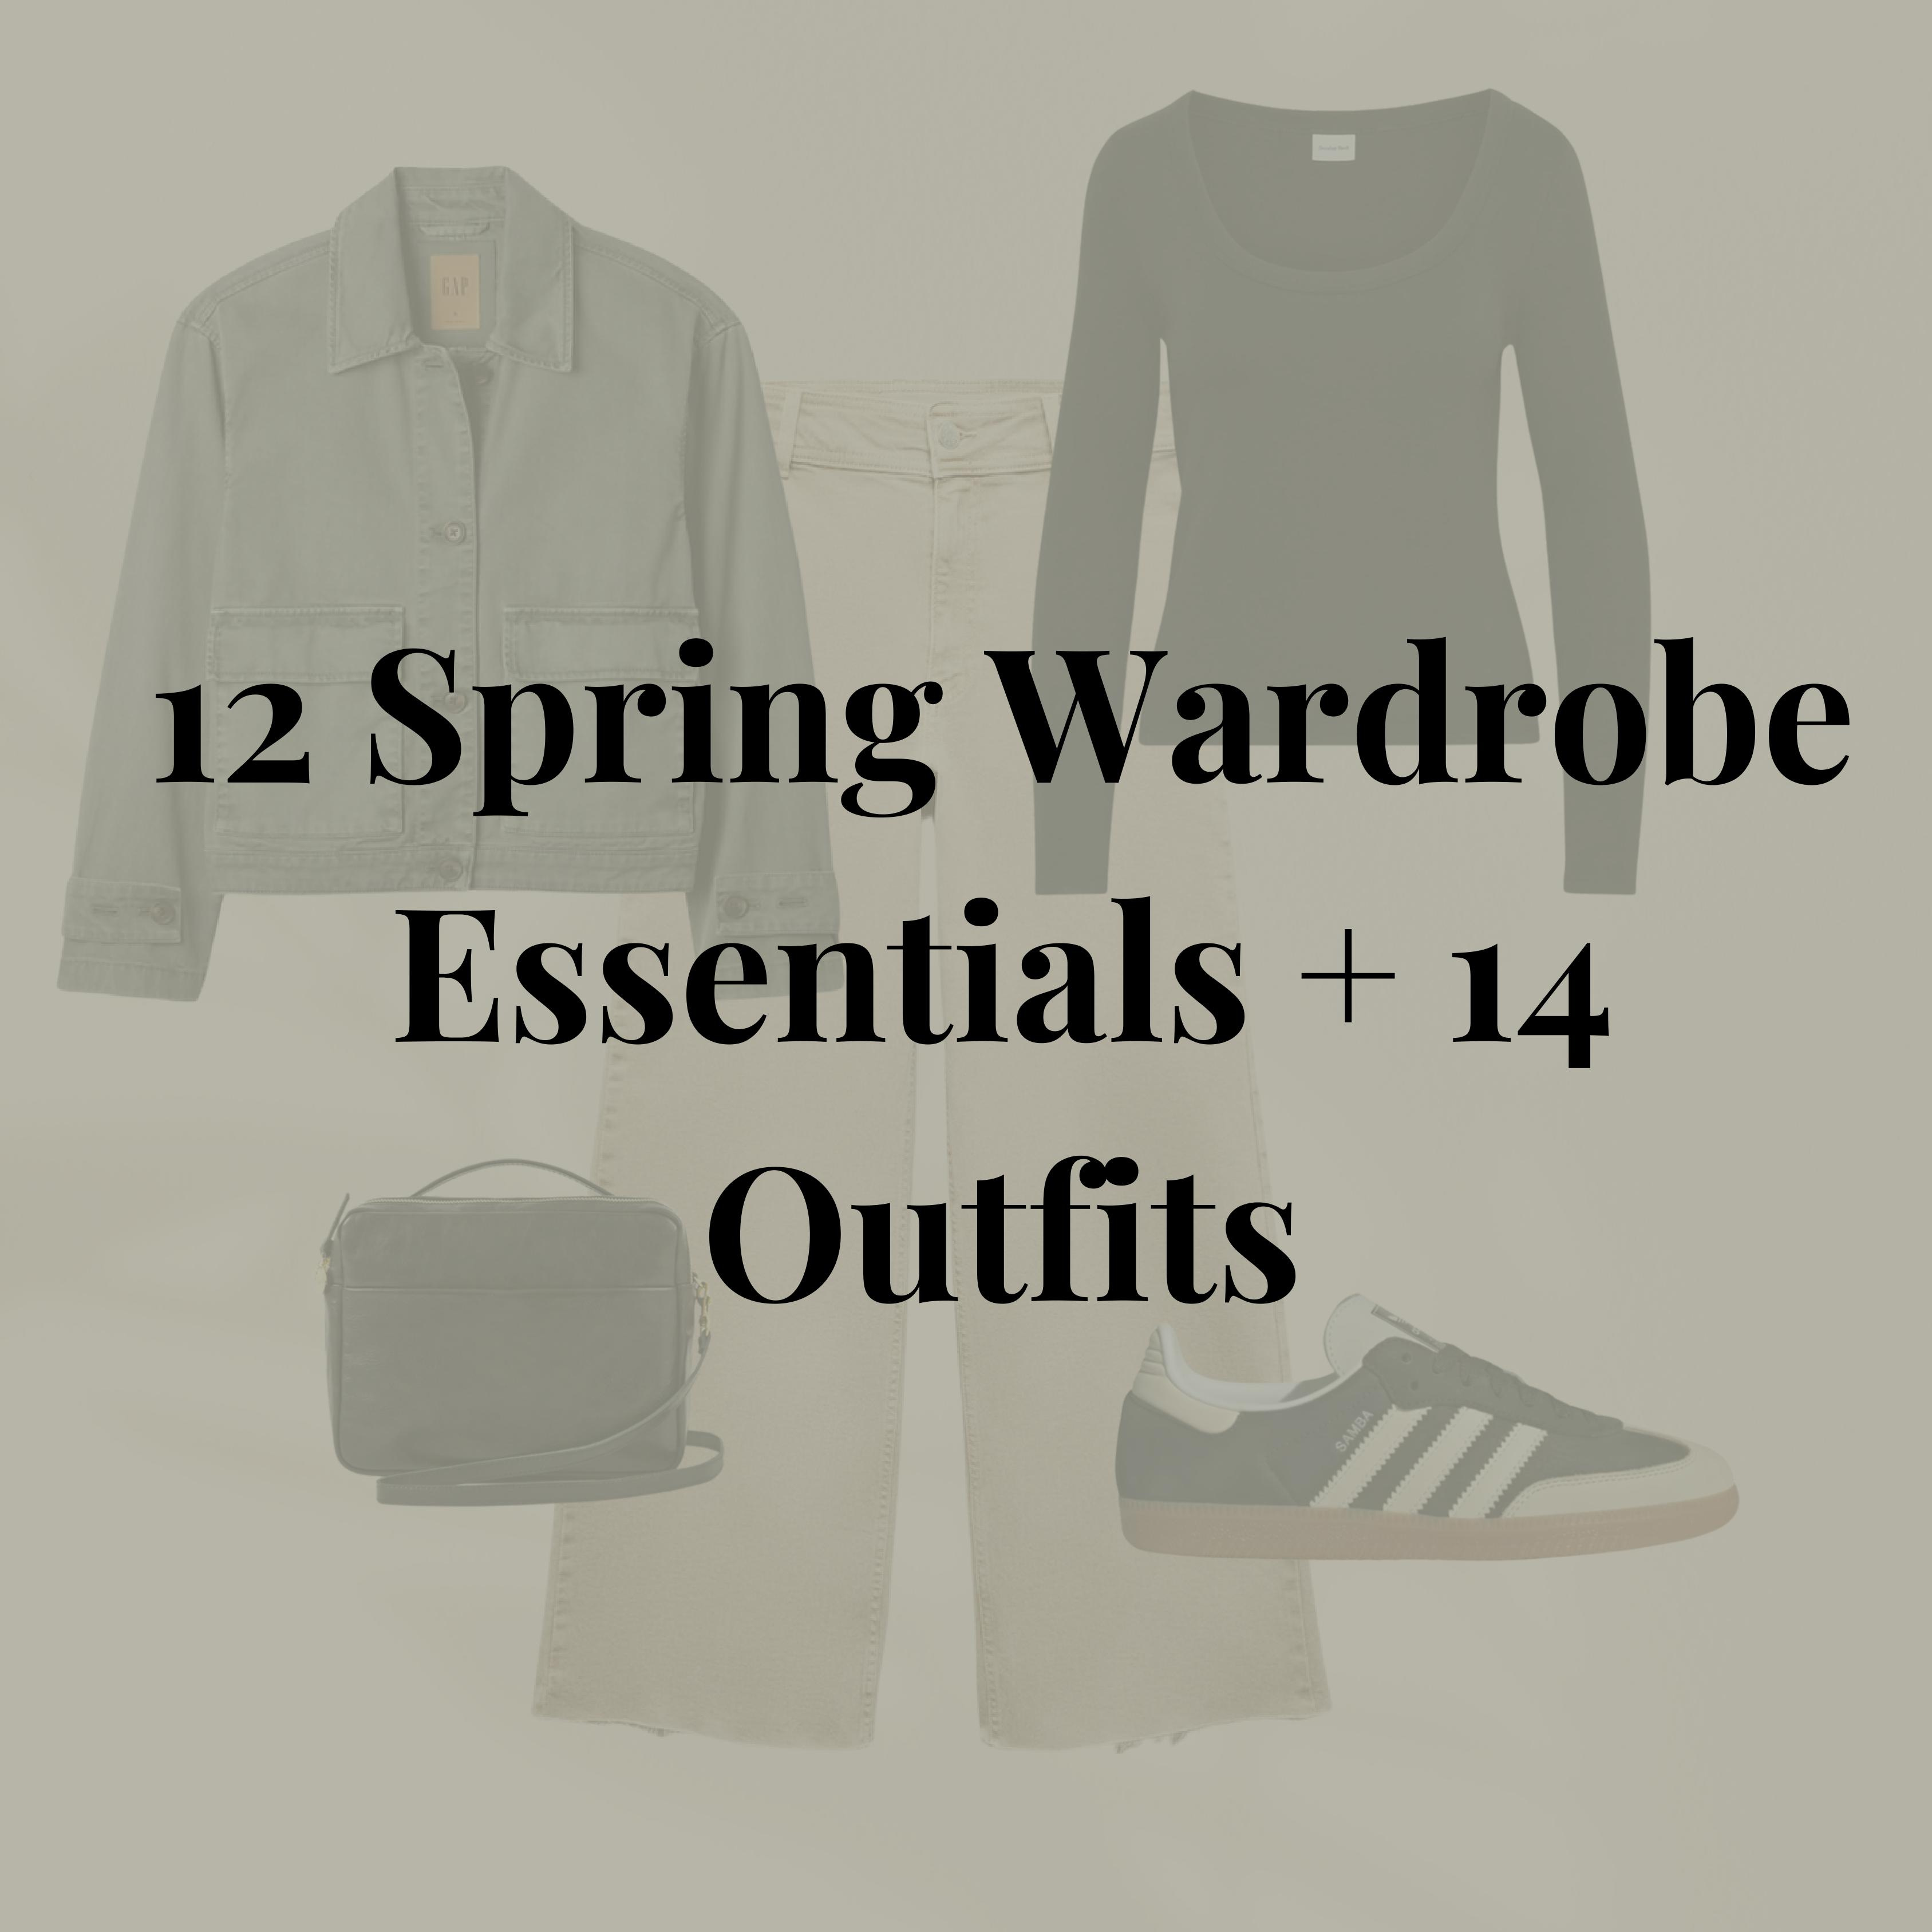 12 Clothing Wardrobe Essentials for Spring With 14 Printable